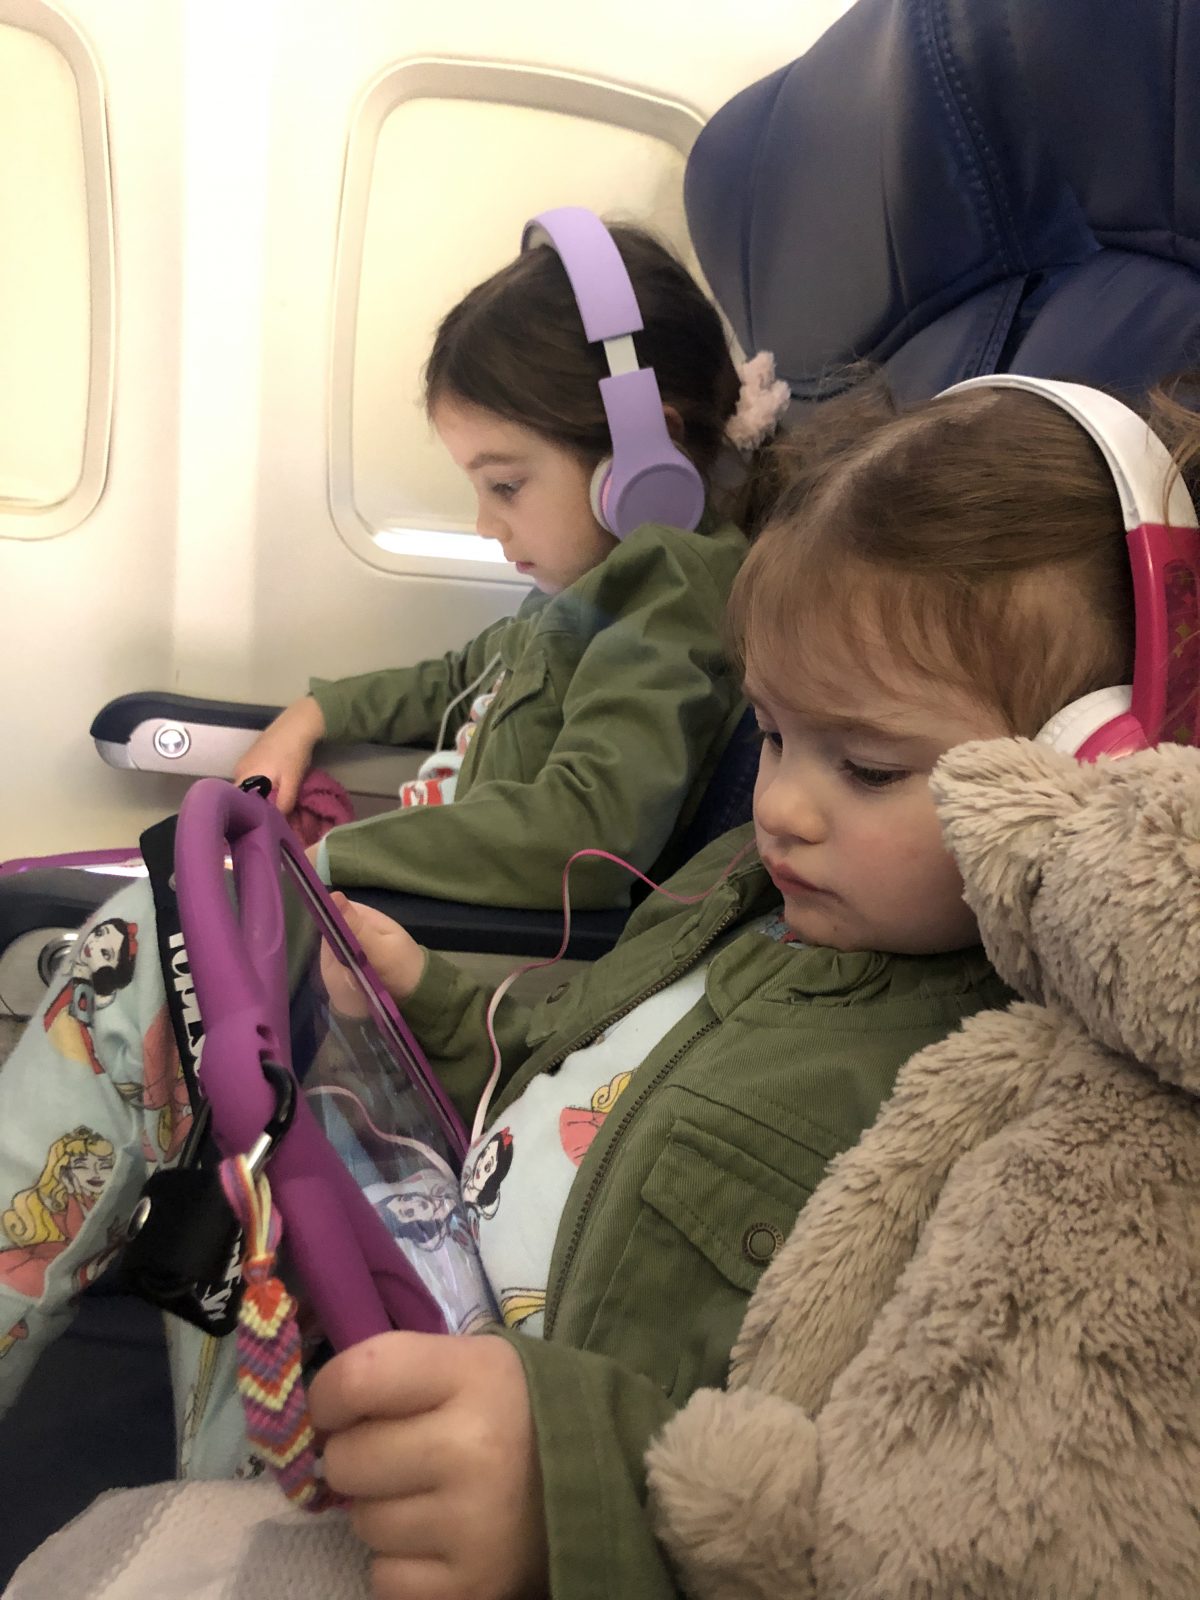 Toddlers wearing headphones and watching ipads on a plane